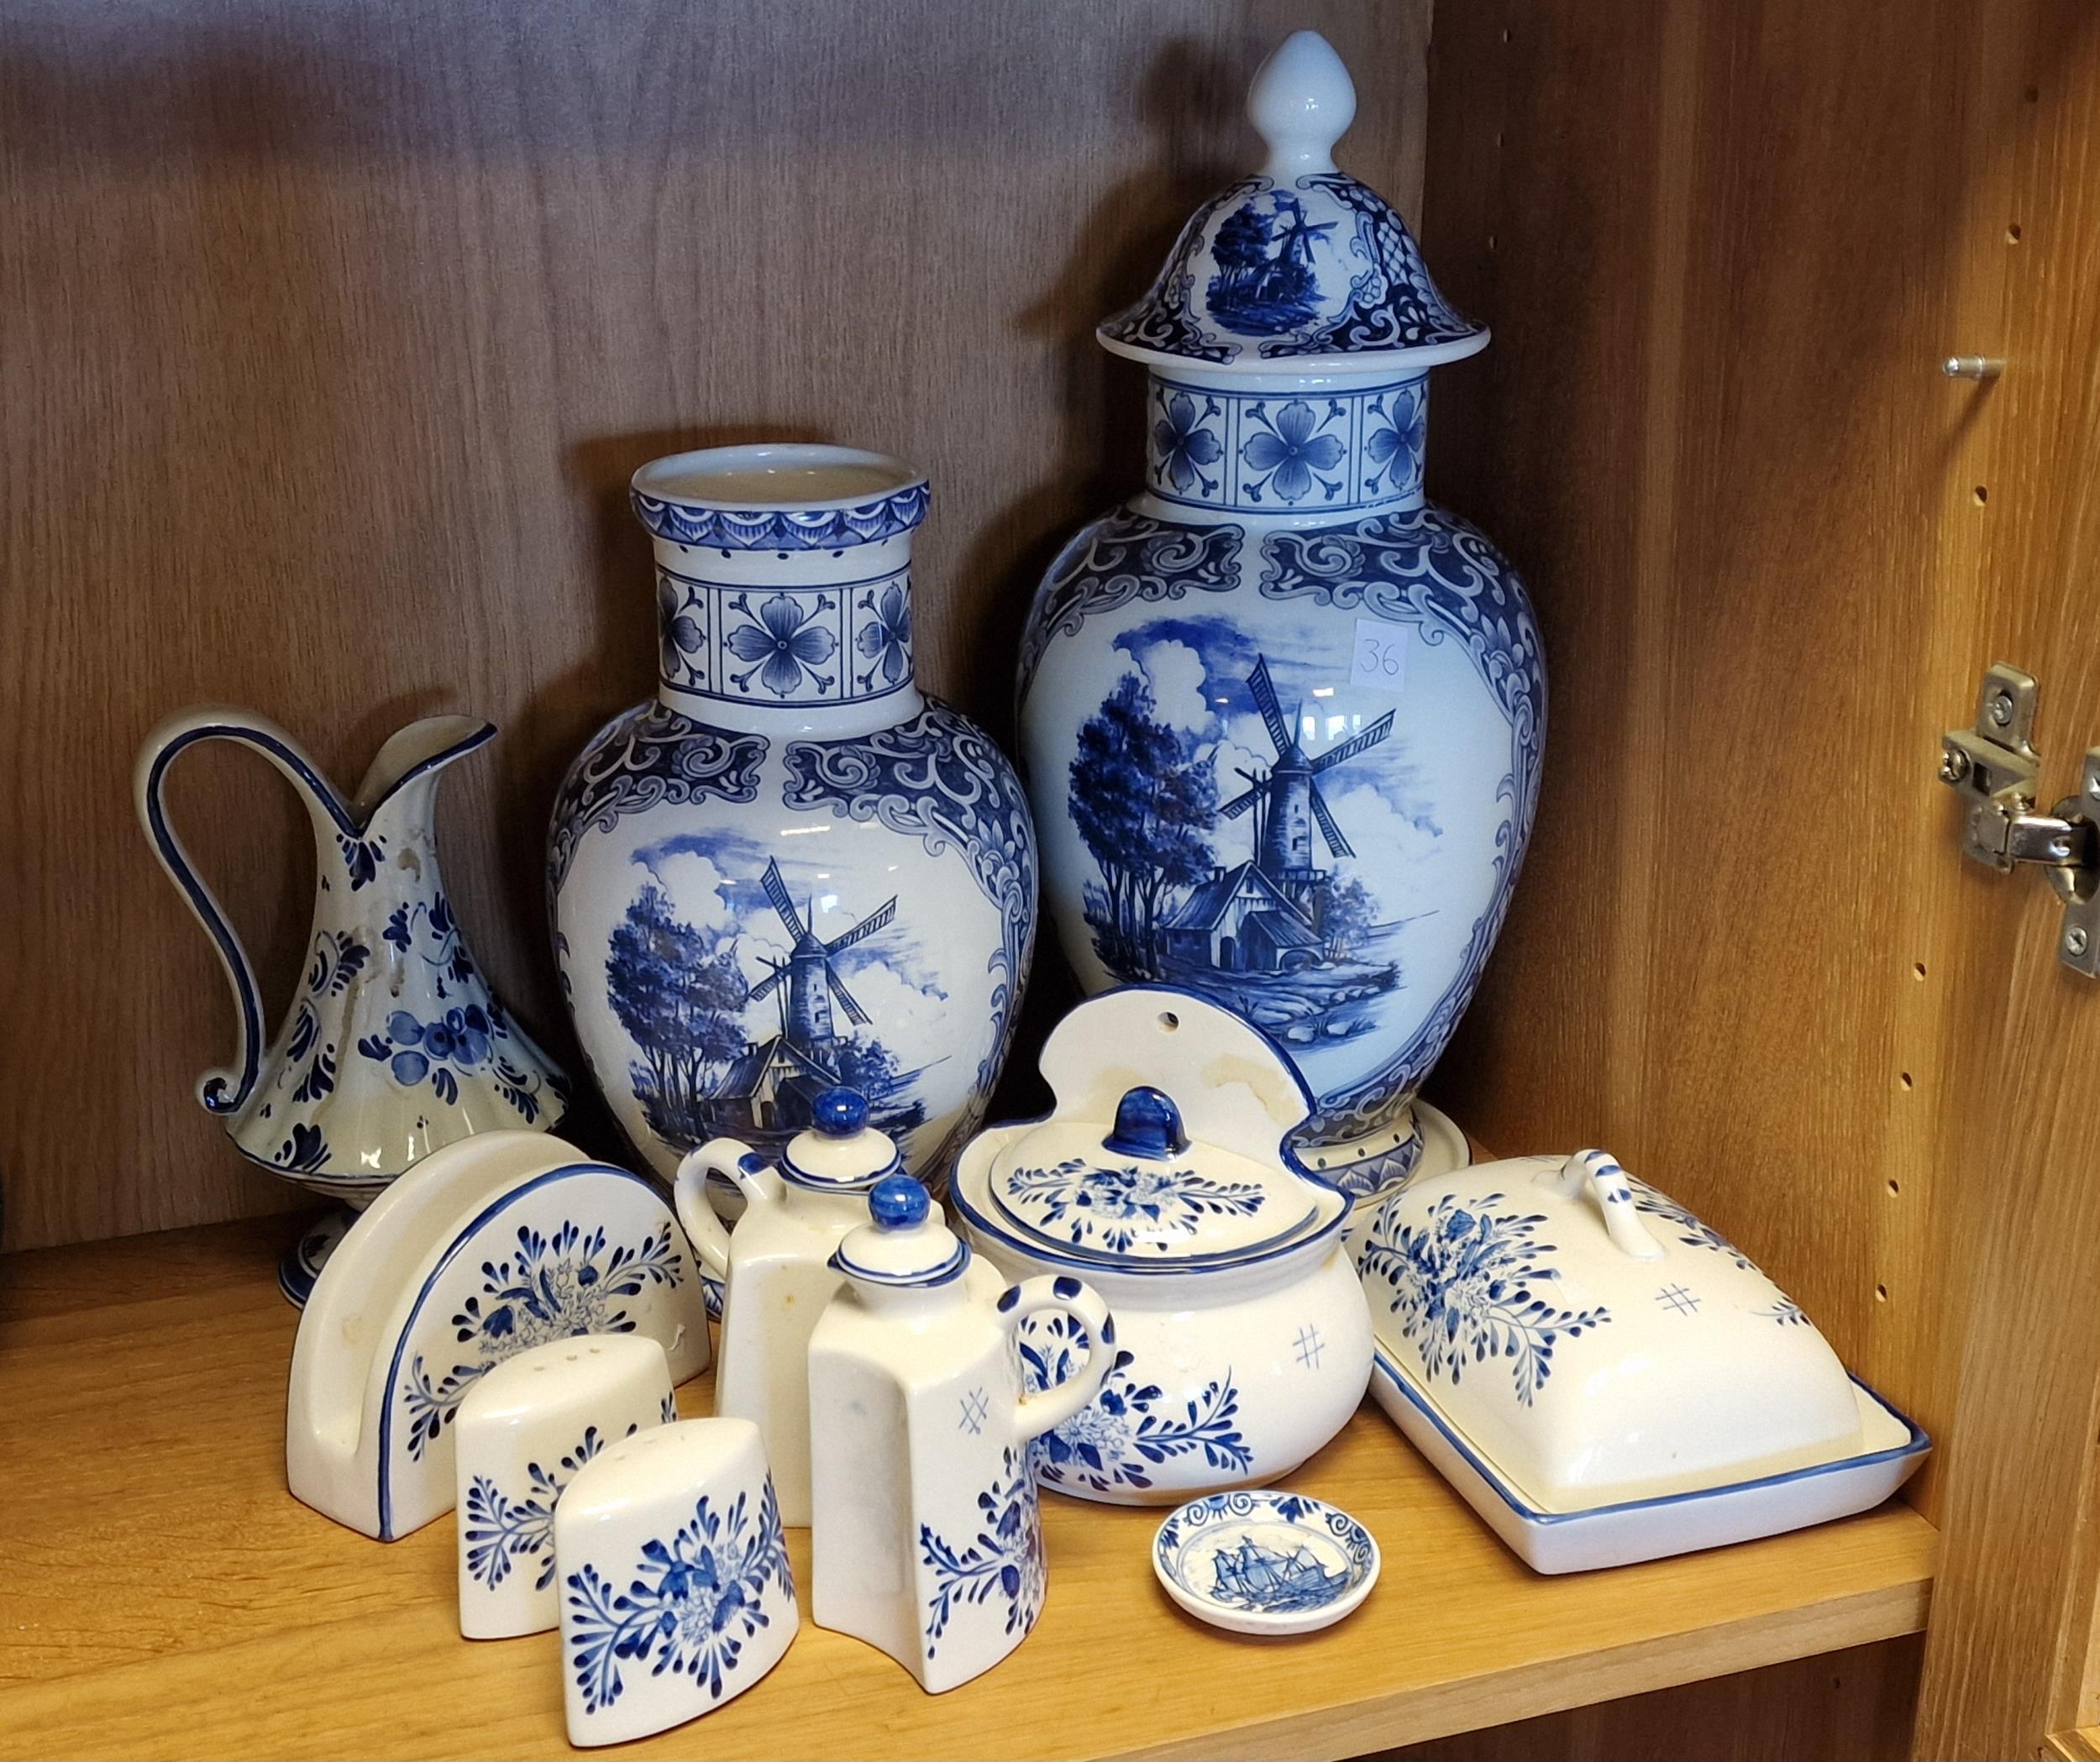 Delft Ware Blue & White Willow Influence Collection of Ceramics, Teawares & Ginger Jars